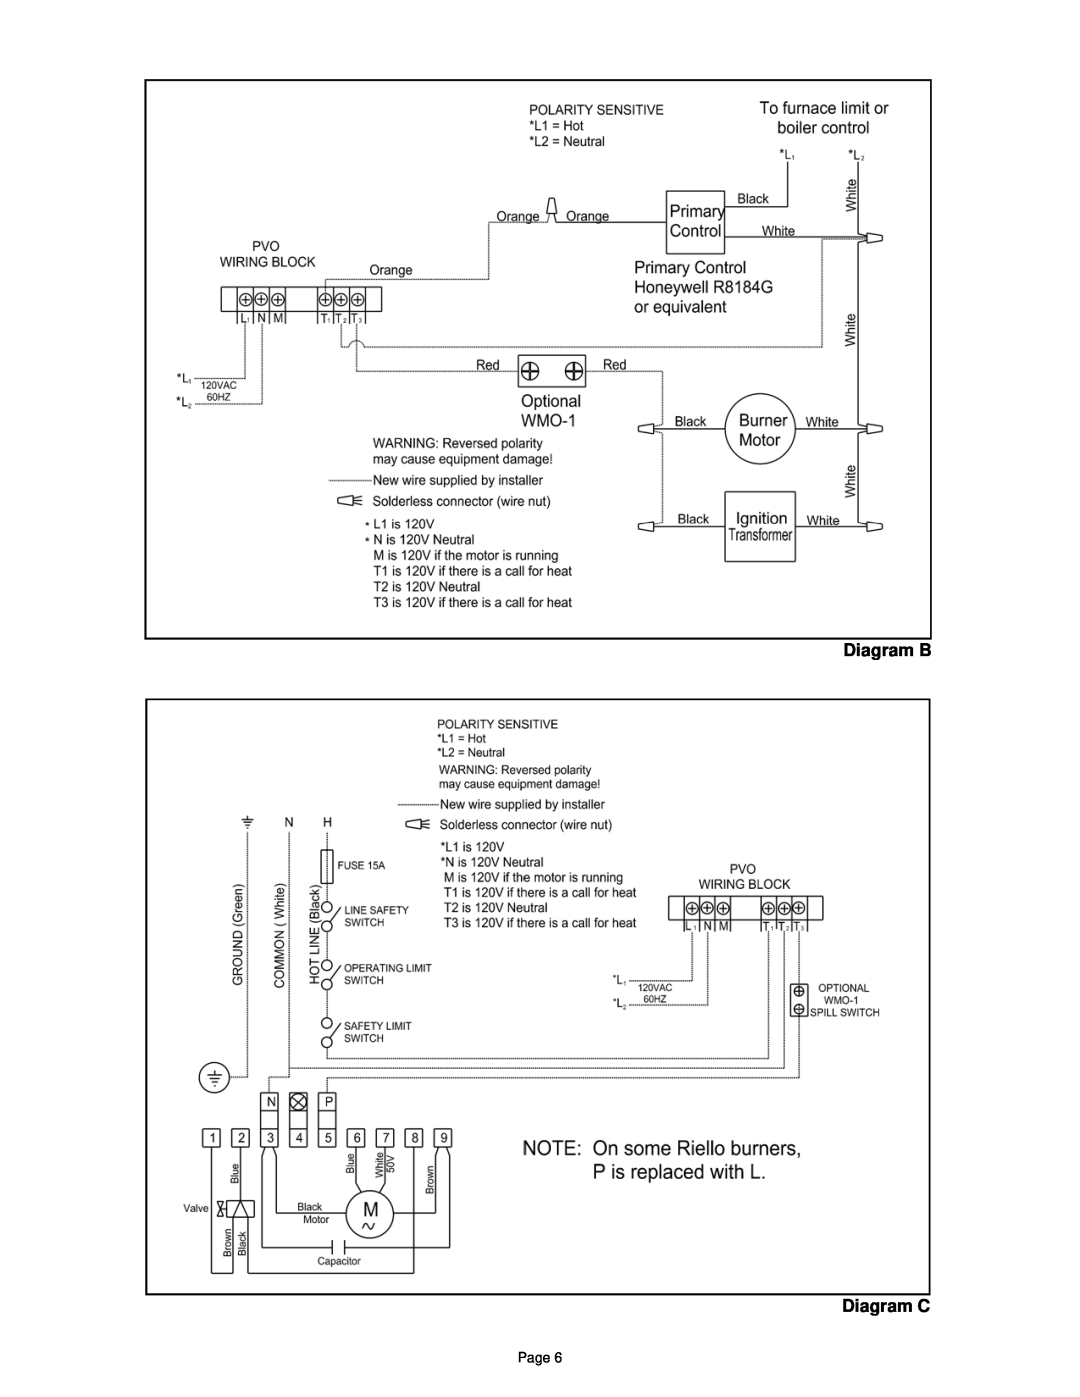 Field Controls PVO-600, PVO-300 specifications Diagram B Diagram C, Page 